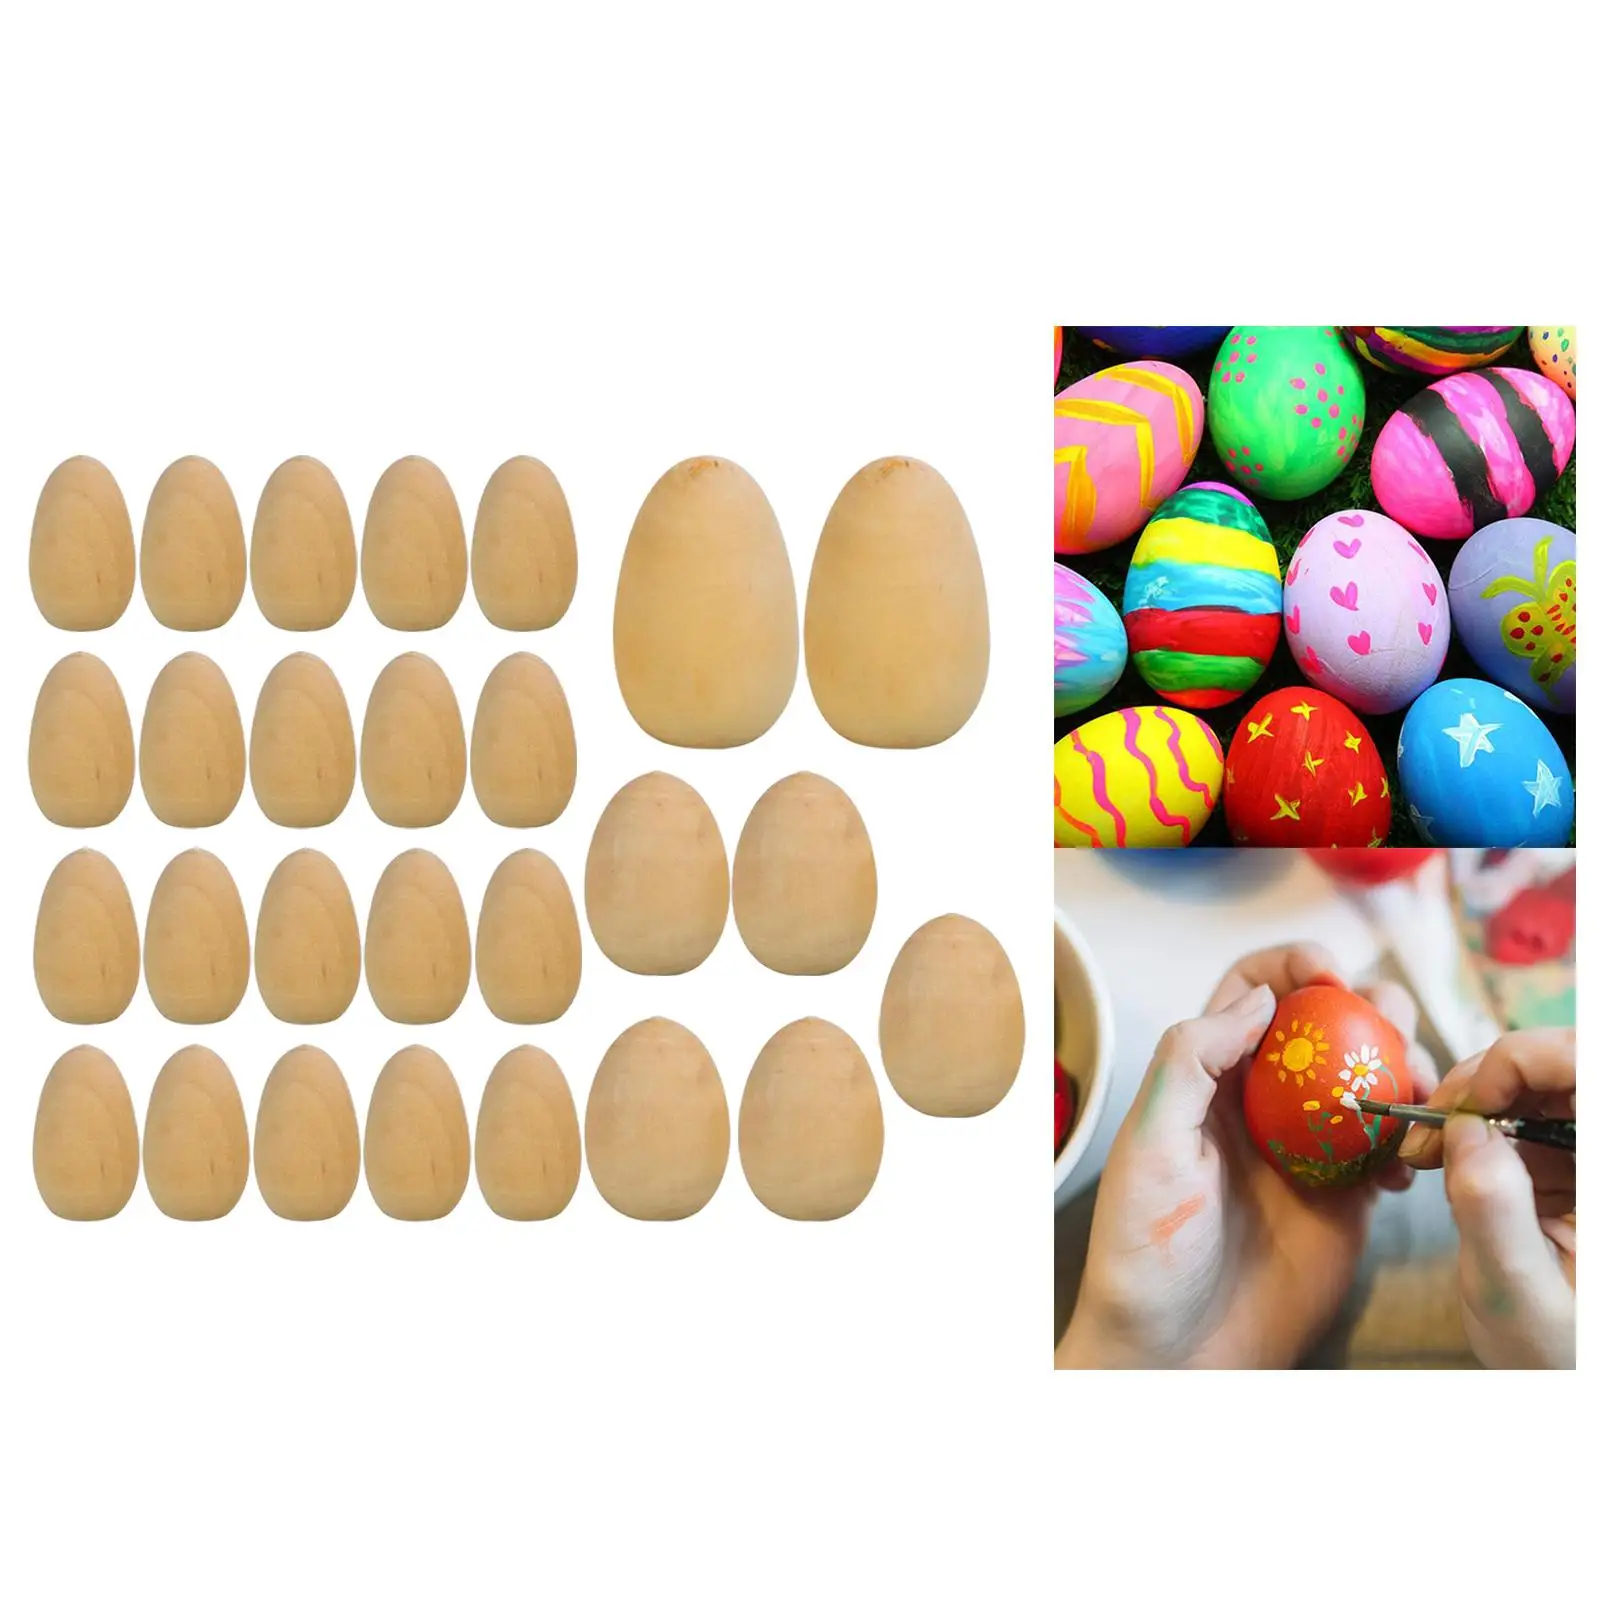 27x Unfinished Wood Eggs with Flat Bottom,Fake Eggs Wooden Blank Eggs for DIY Easter Holiday Craft,Home Decor,Kids Gifts